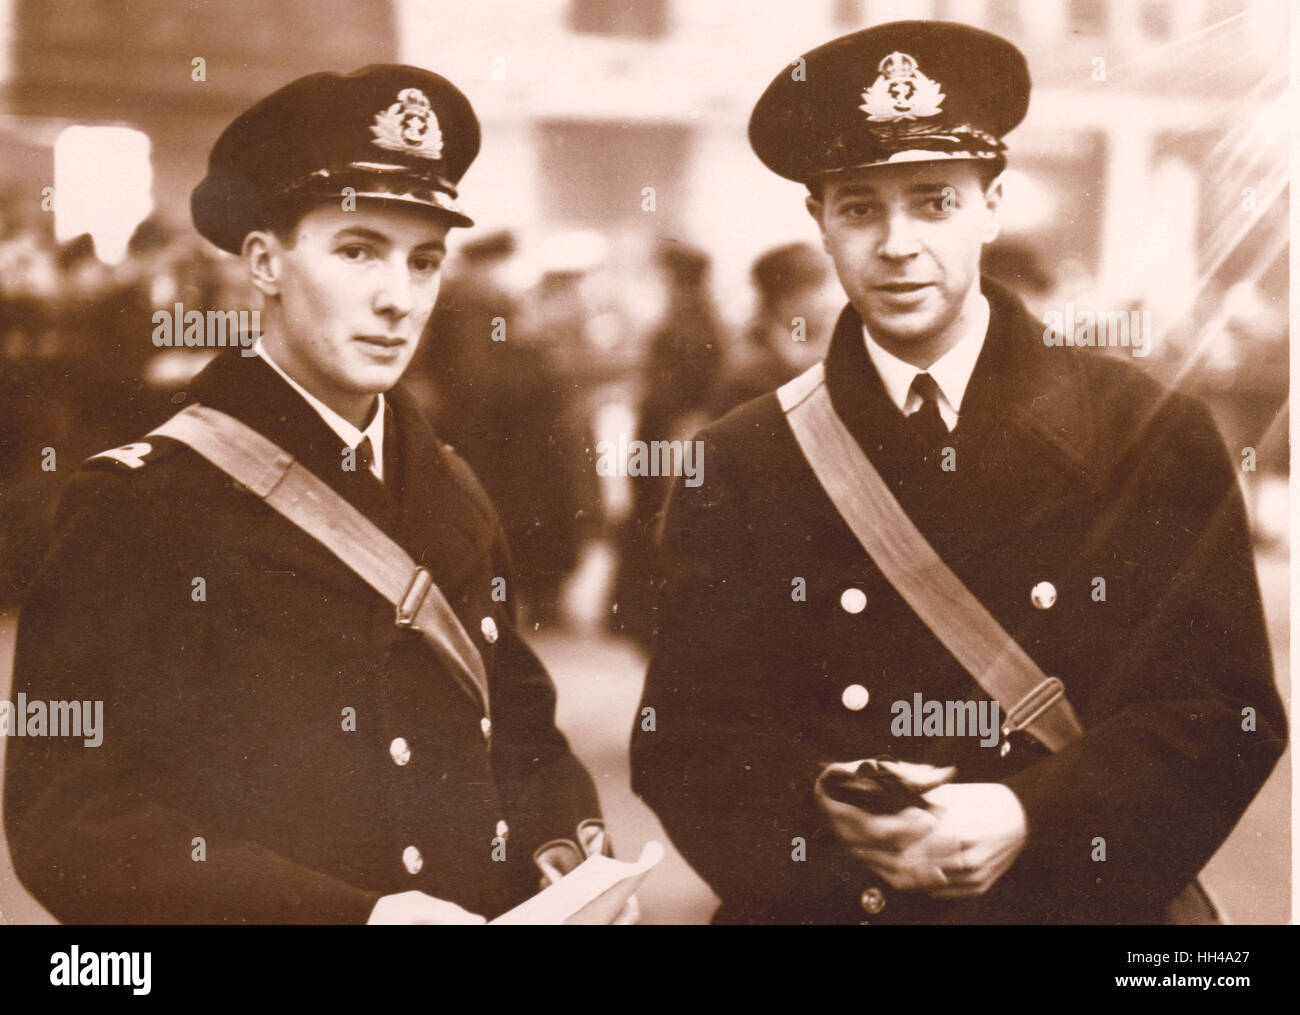 Midshipman Robert W Don of HMS Exeter and Archibald Cameron of HMS Exeter Received DSC for gallantry in the Graf Spee action pic Stock Photo